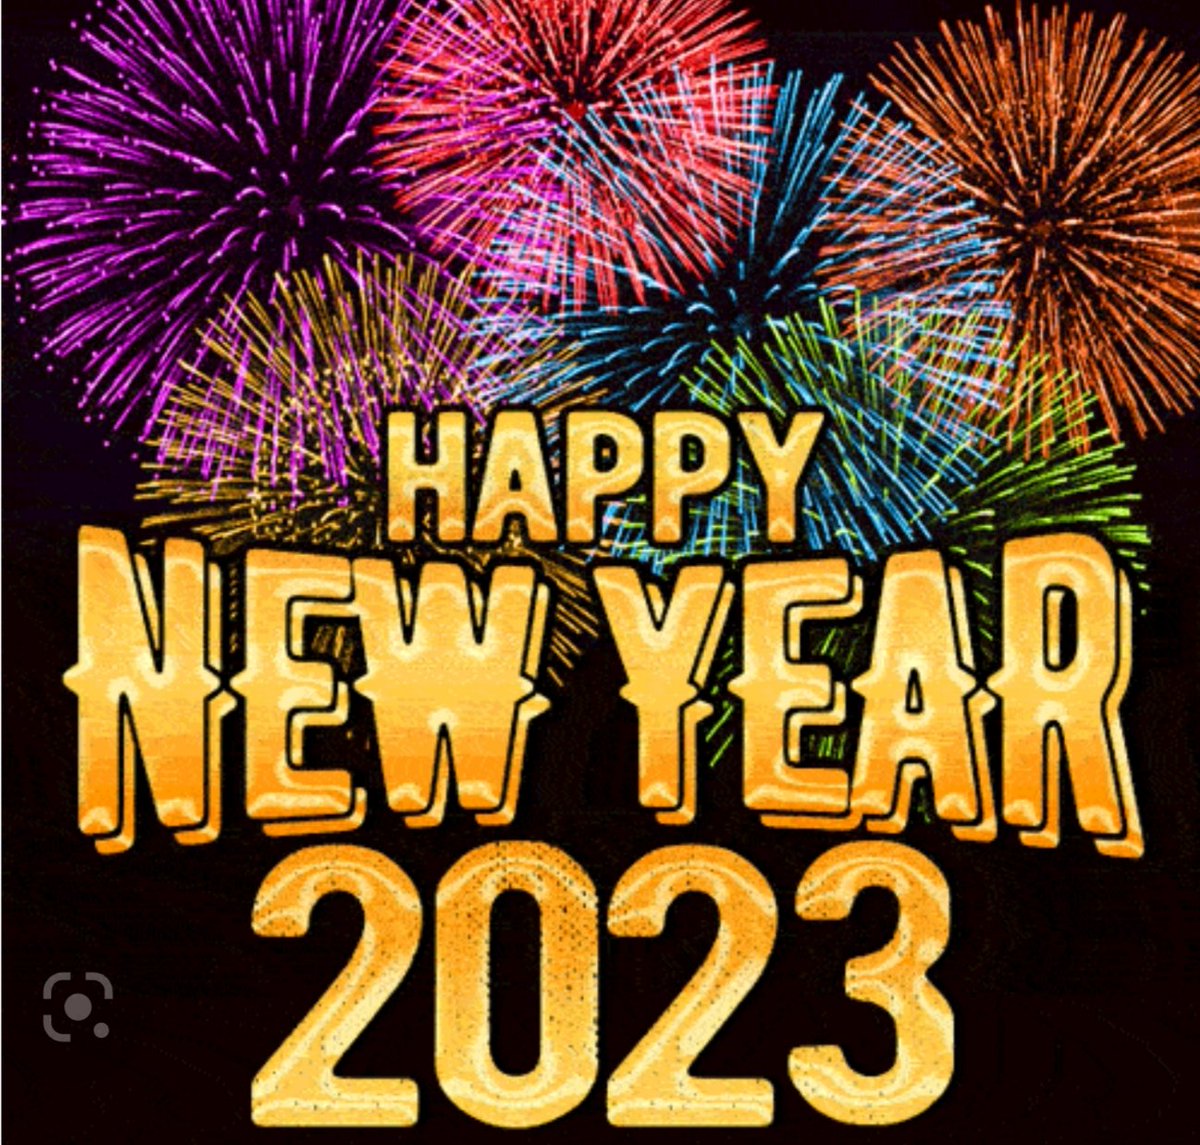 To All May This Be A Healthy Happy One for everyone. #Trump2024 #LFG #BACKTHEBLUE #FreeJ6ersNow